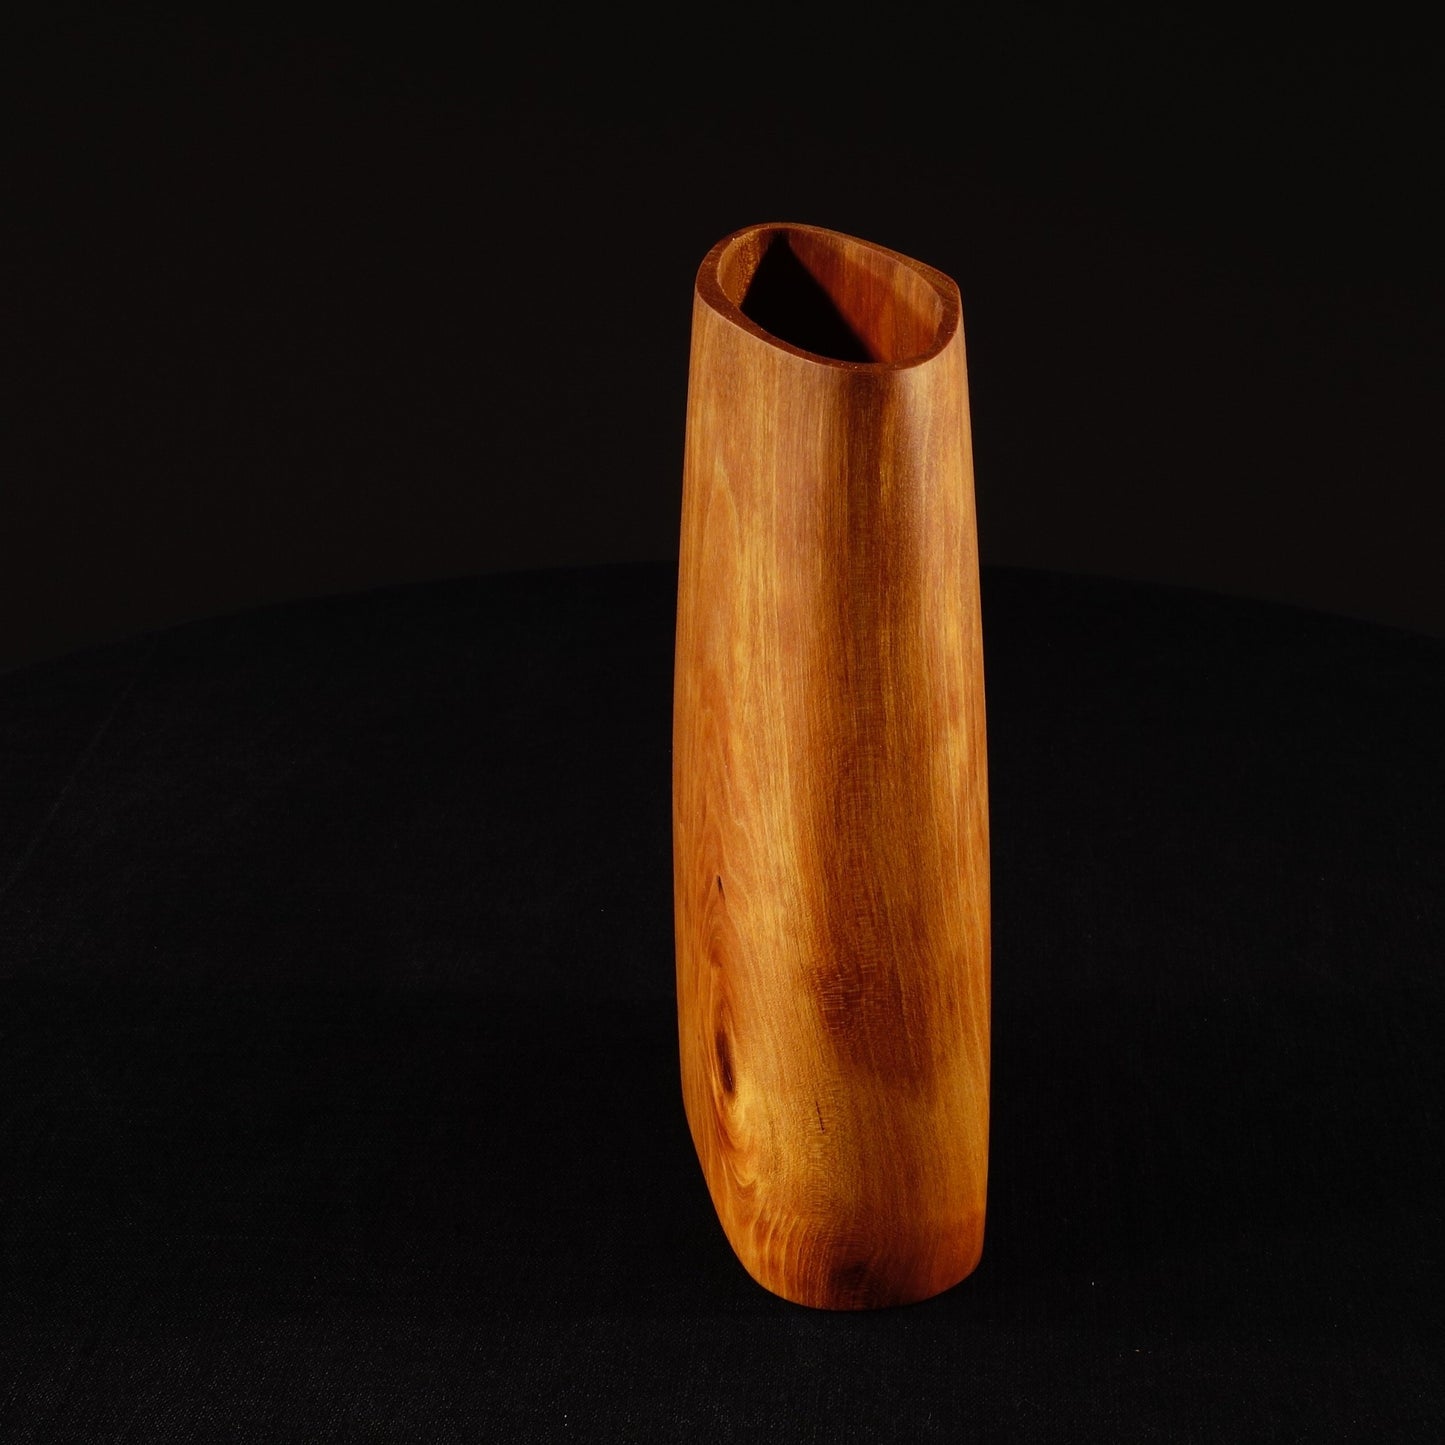 Wood Flower Vase From Above